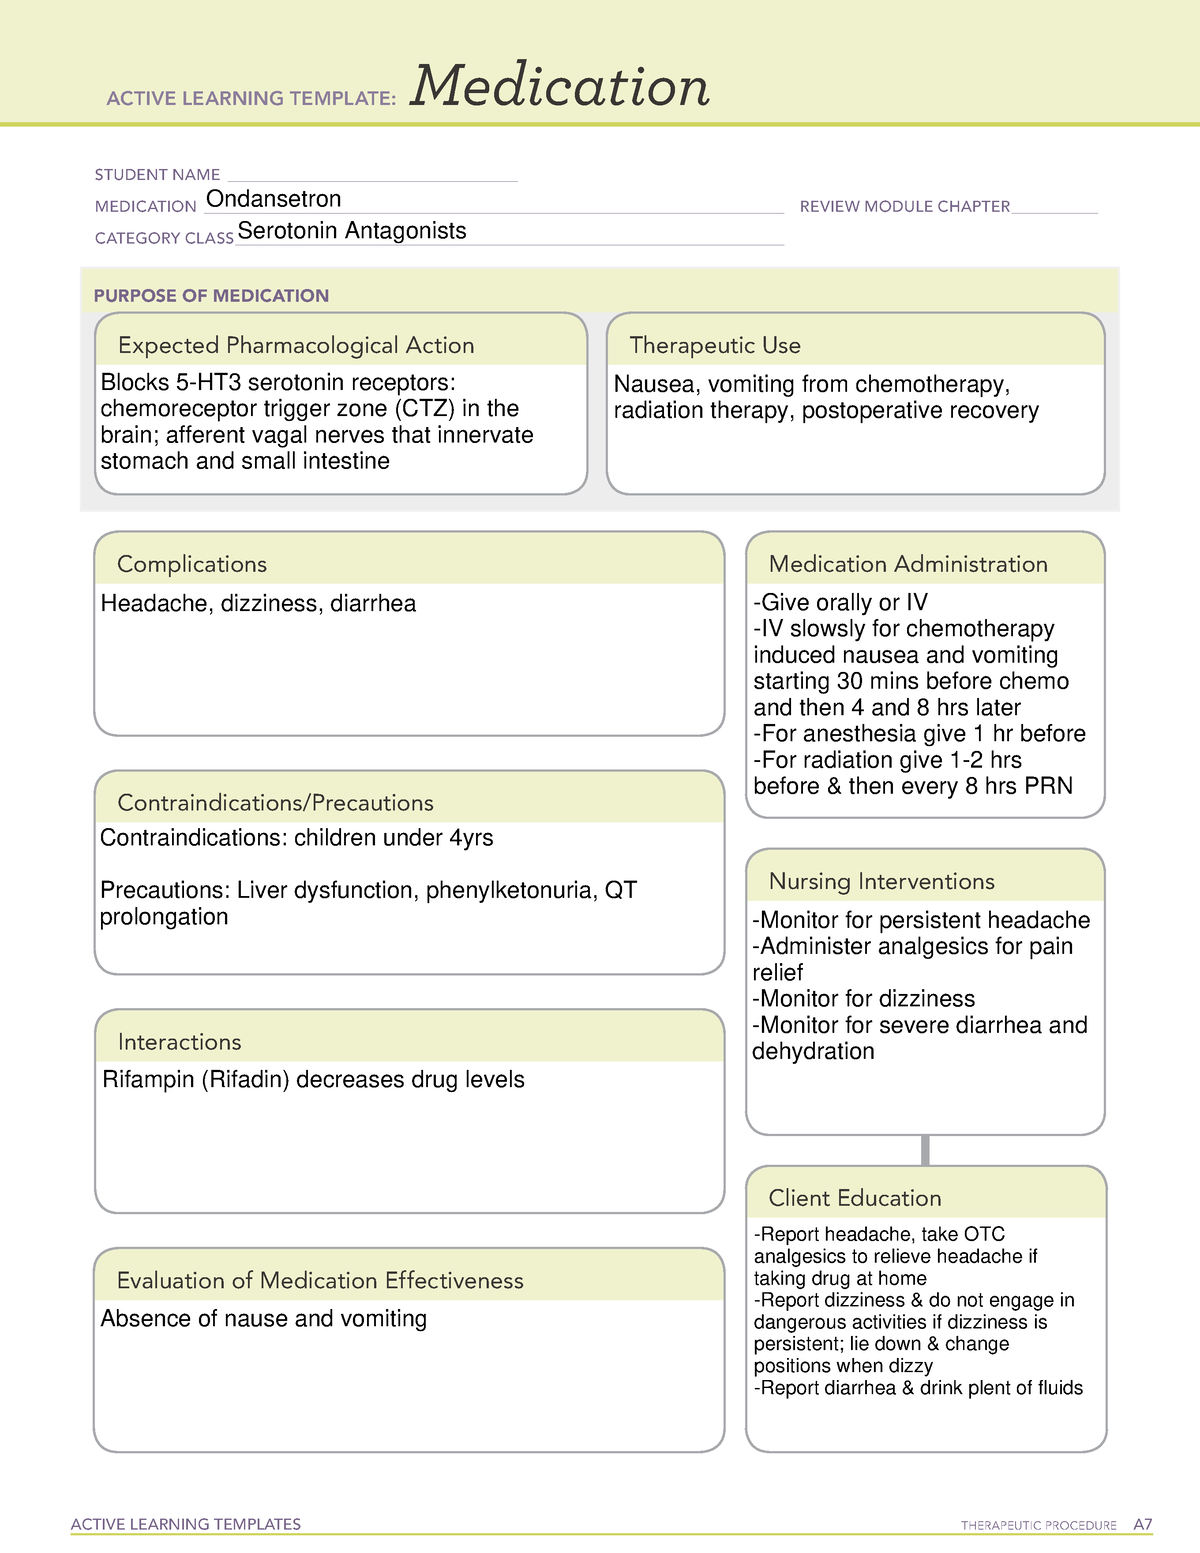 ondansetron-drug-template-active-learning-templates-therapeutic-procedure-a-medication